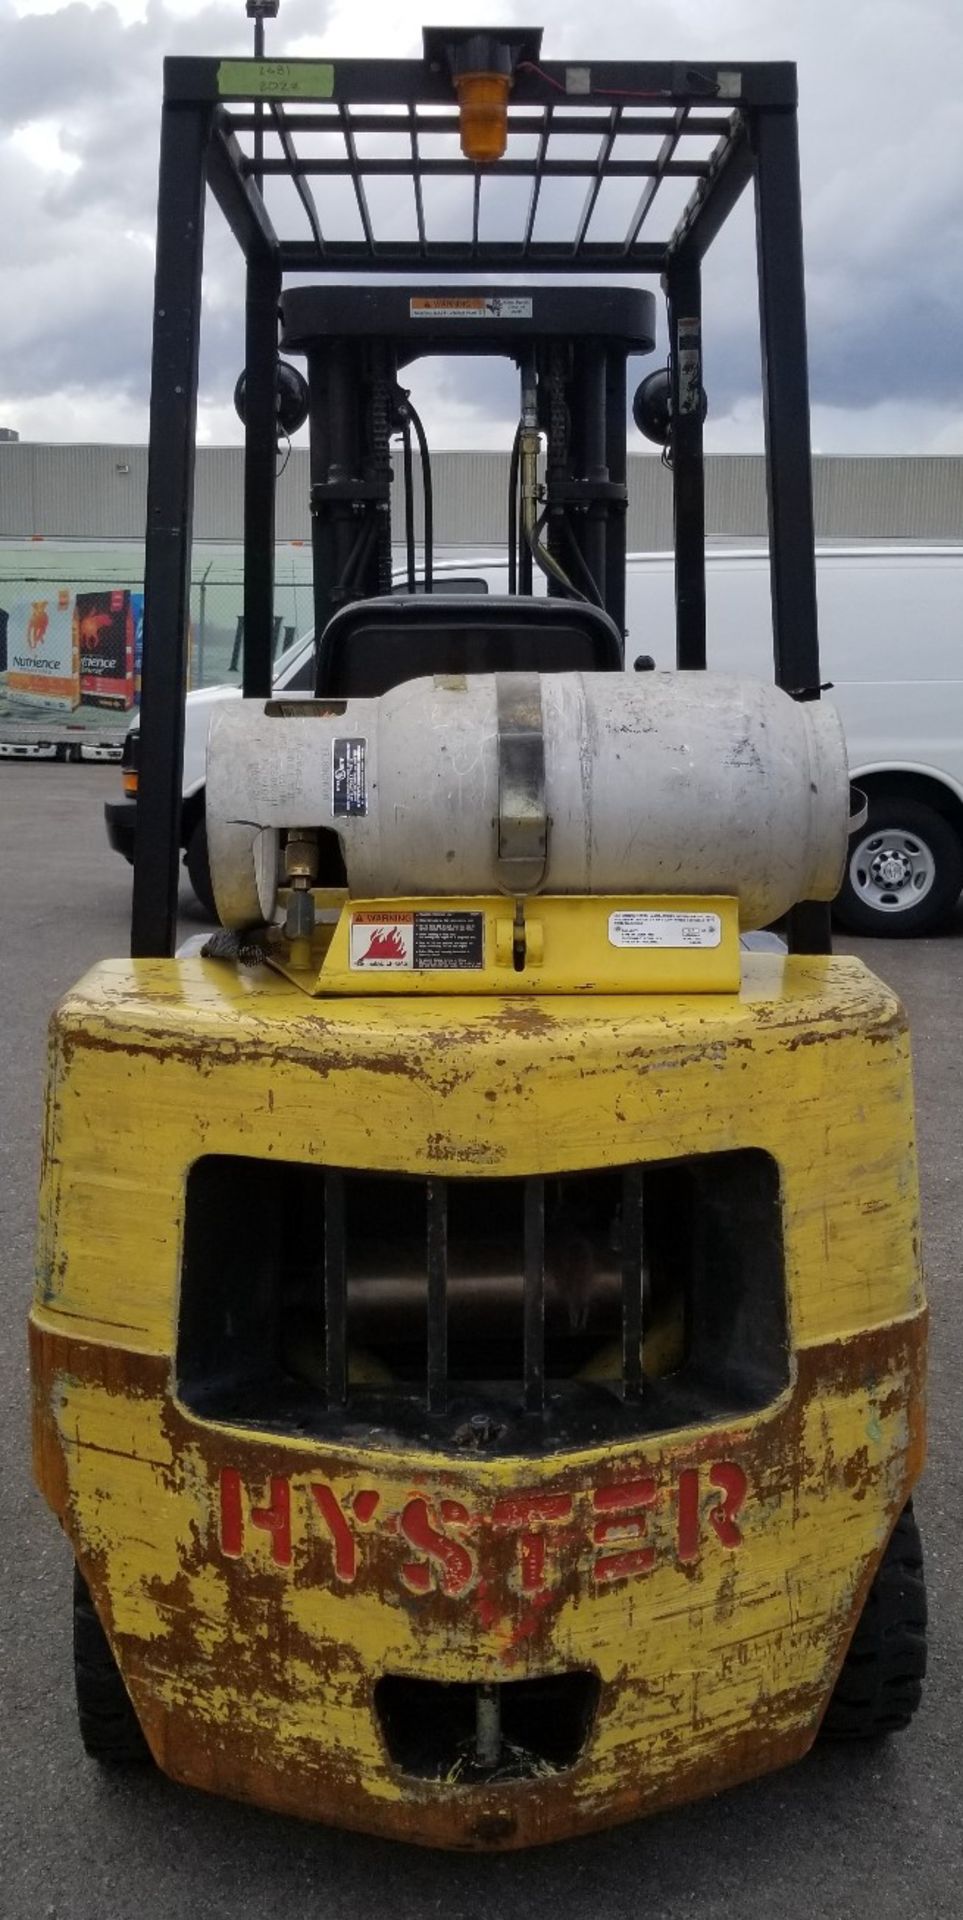 HYSTER (1994) S50XL LPG FORKLIFT WITH 5000 LB. CAPACITY, 189" VERTICAL LIFT, SIDE SHIFT, MULTI- - Image 2 of 2